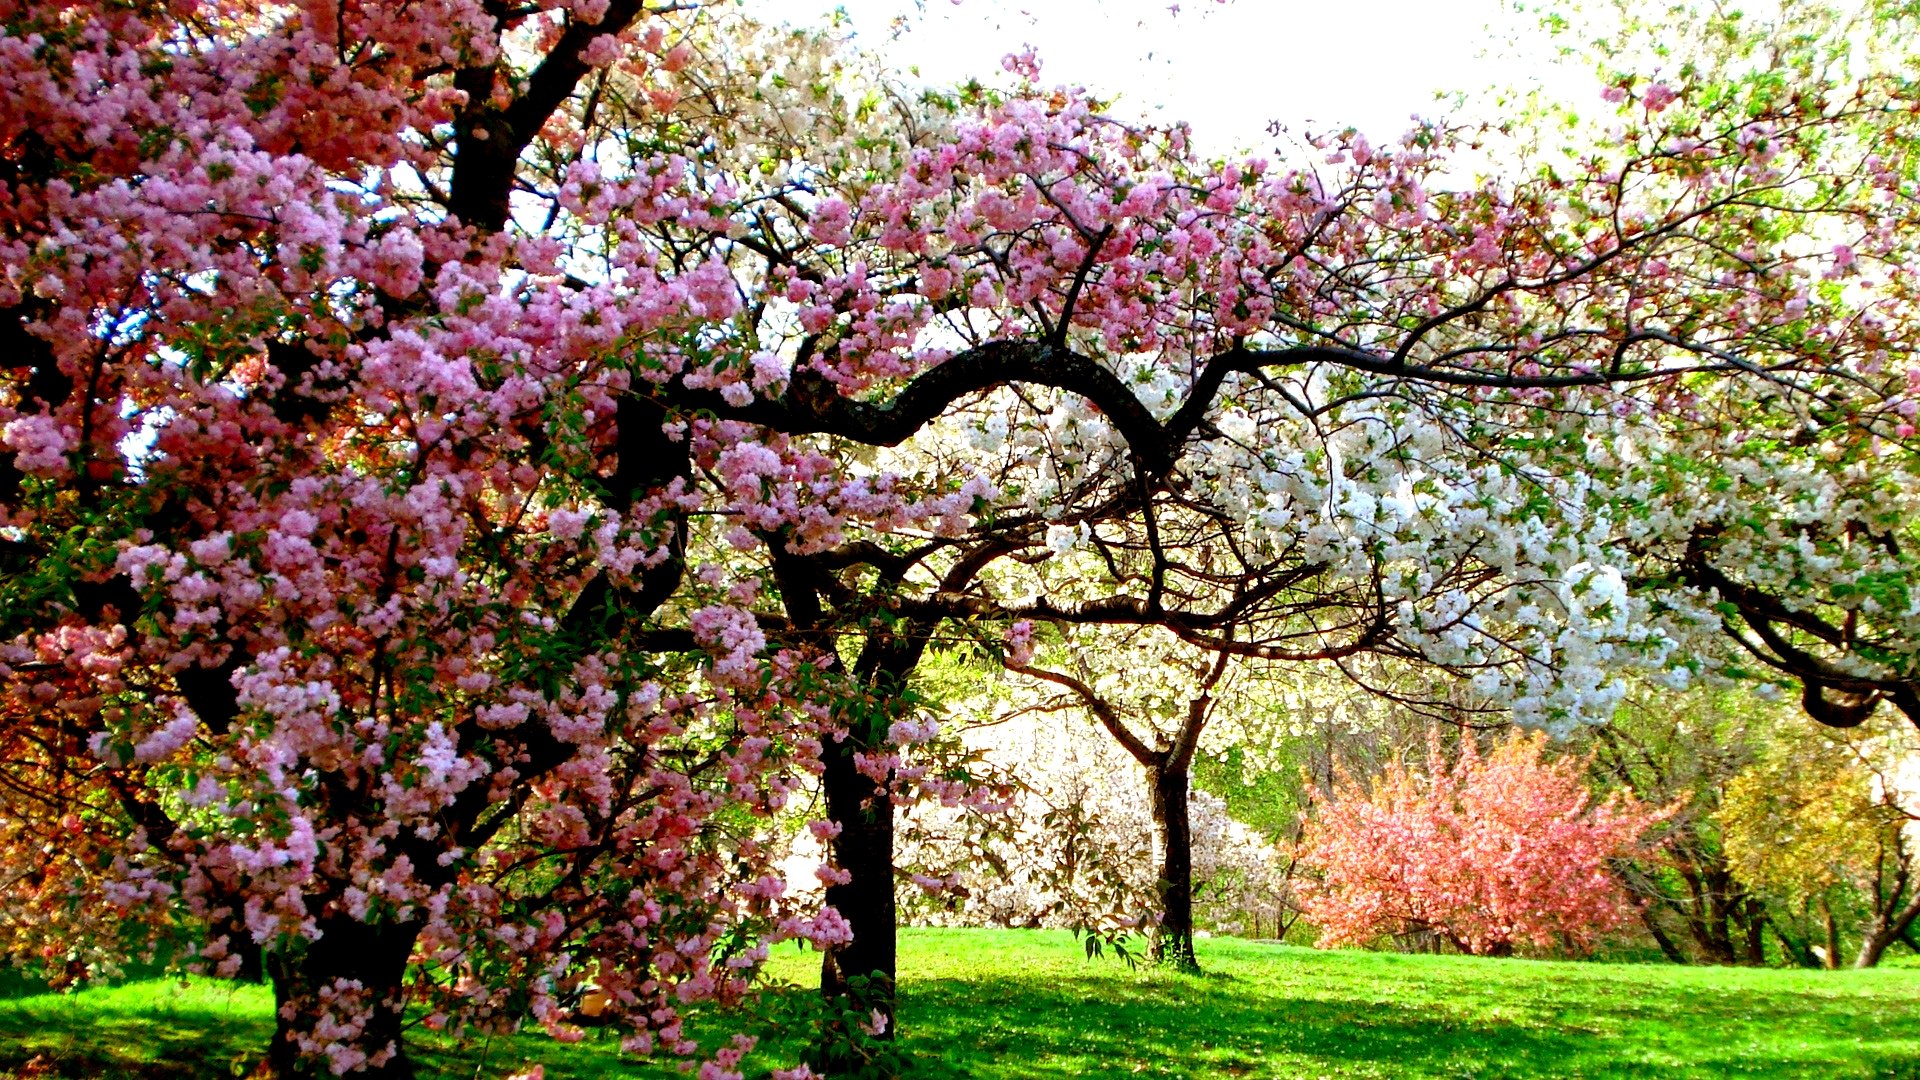 Spring Hd Wallpapers